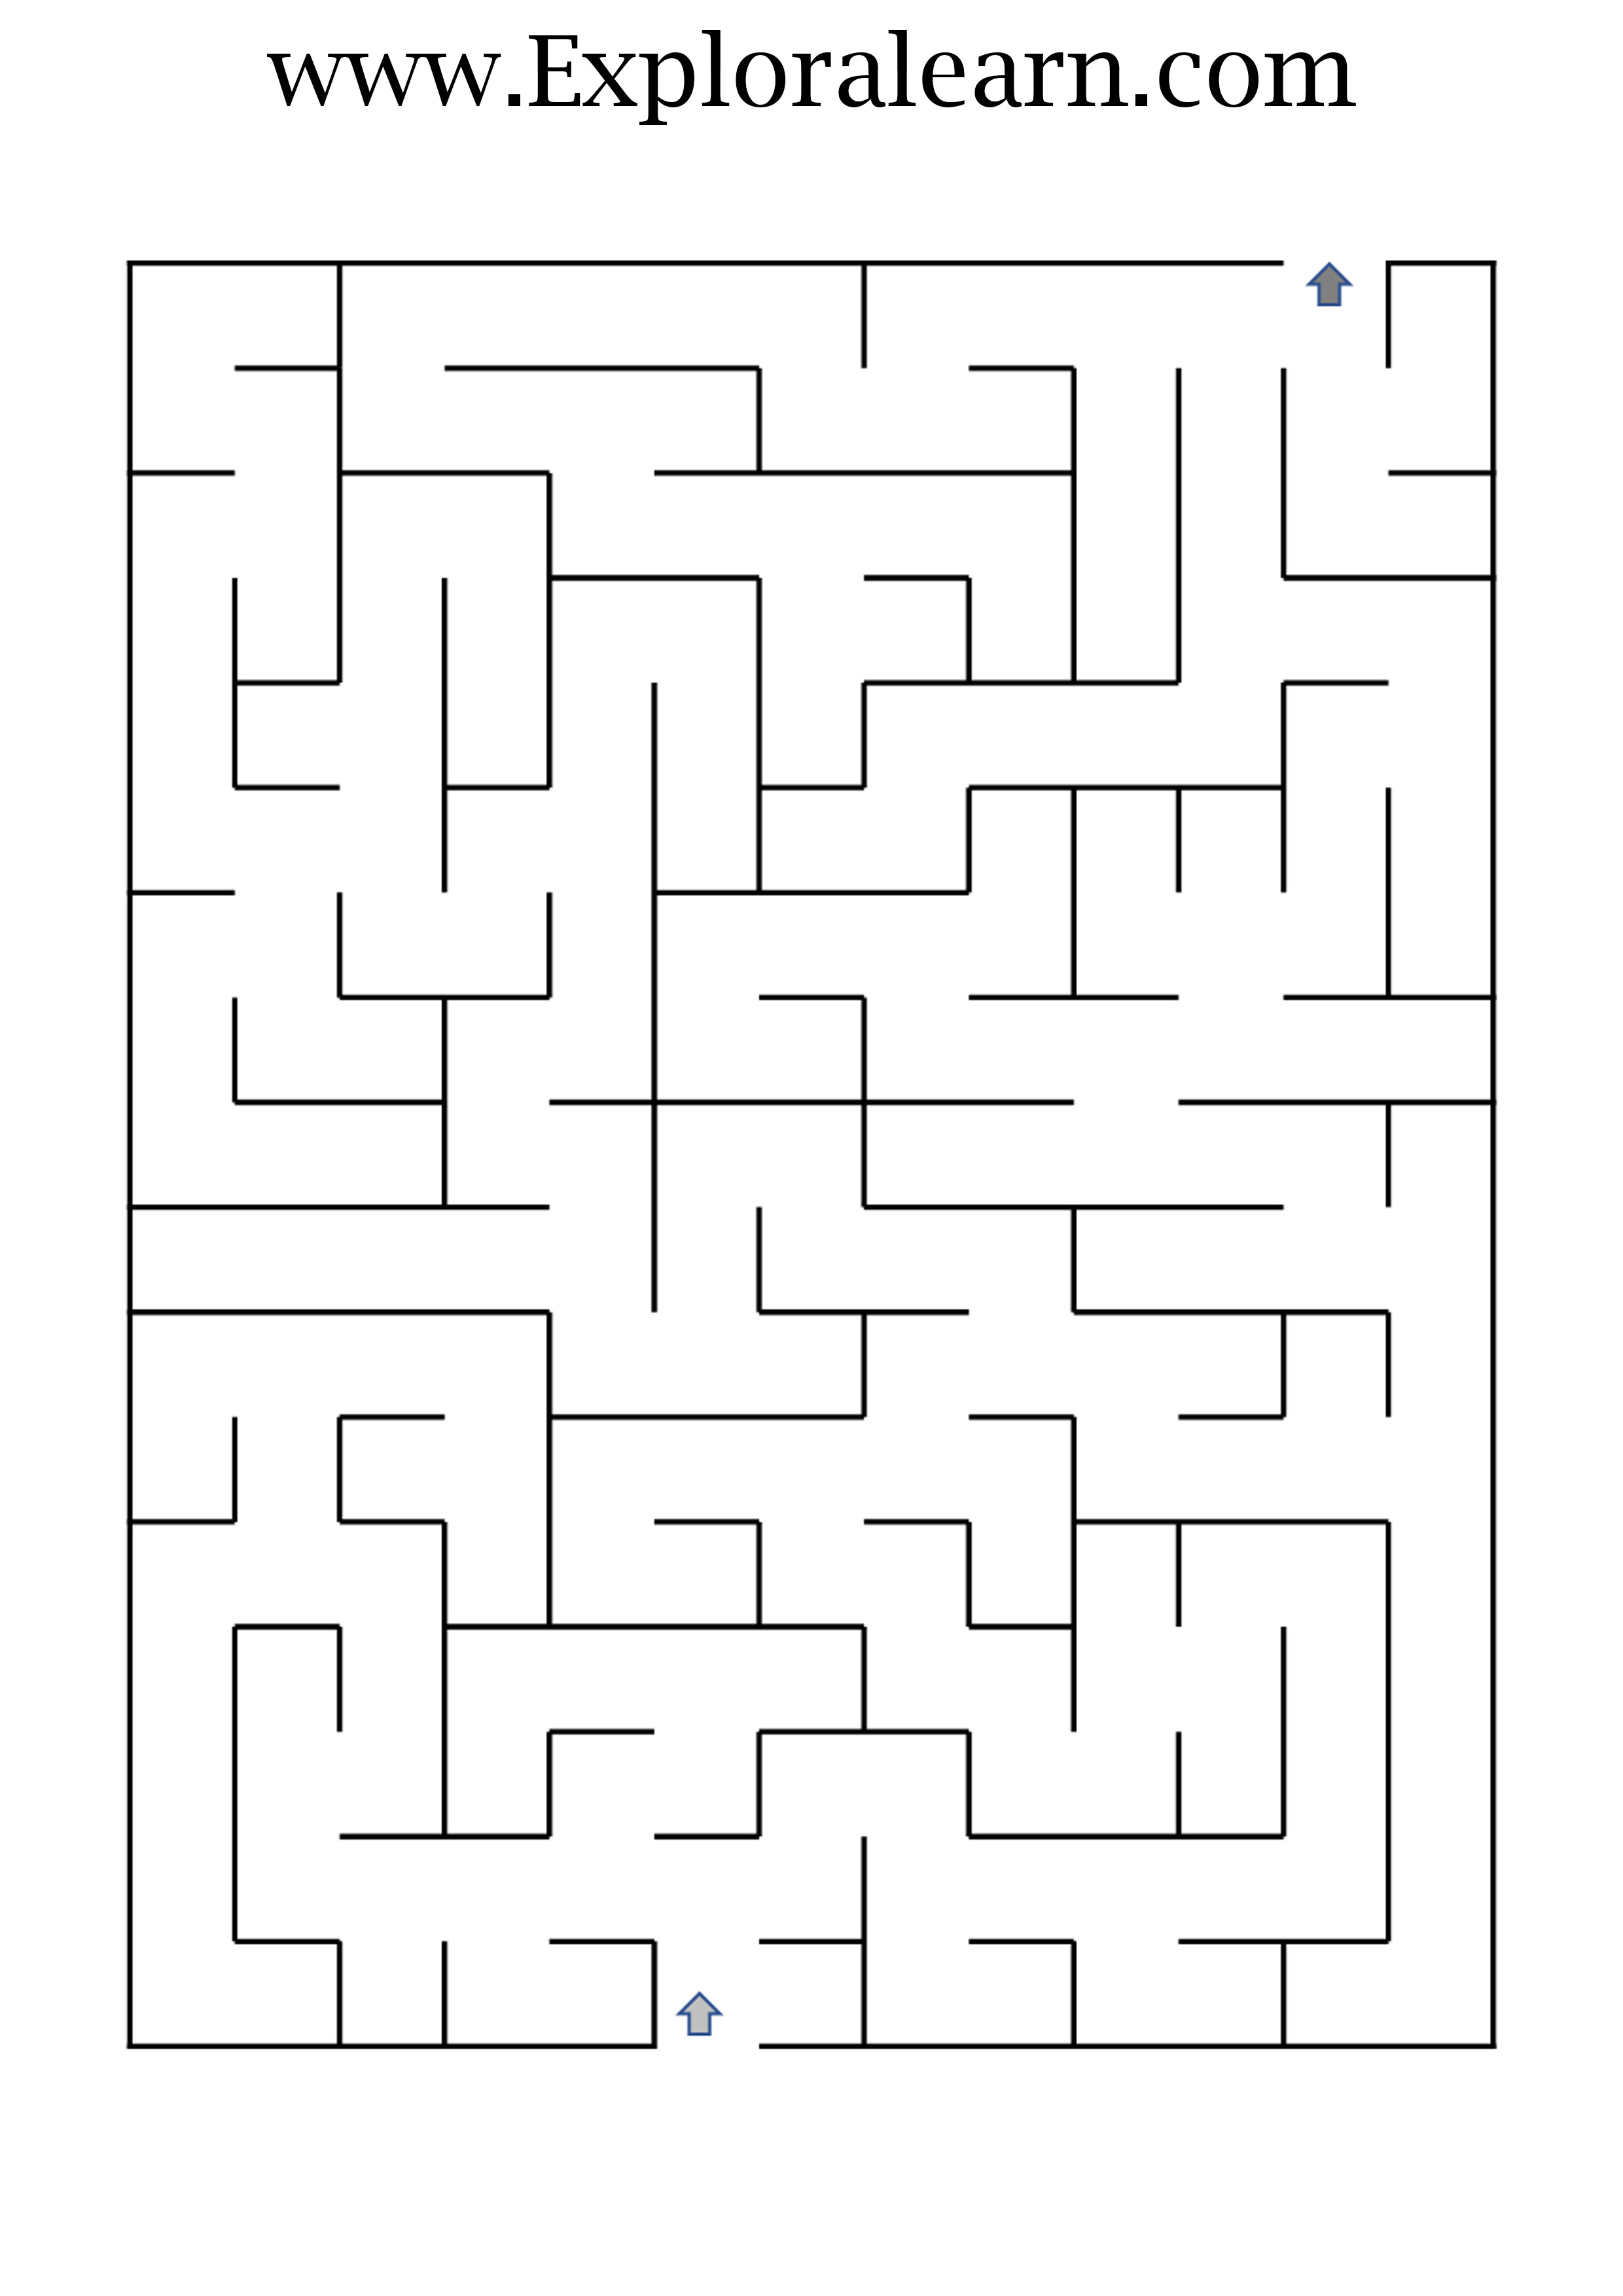 Maze Explorations for Kids (Ages 2-12): Navigate Fun Challenges with ...